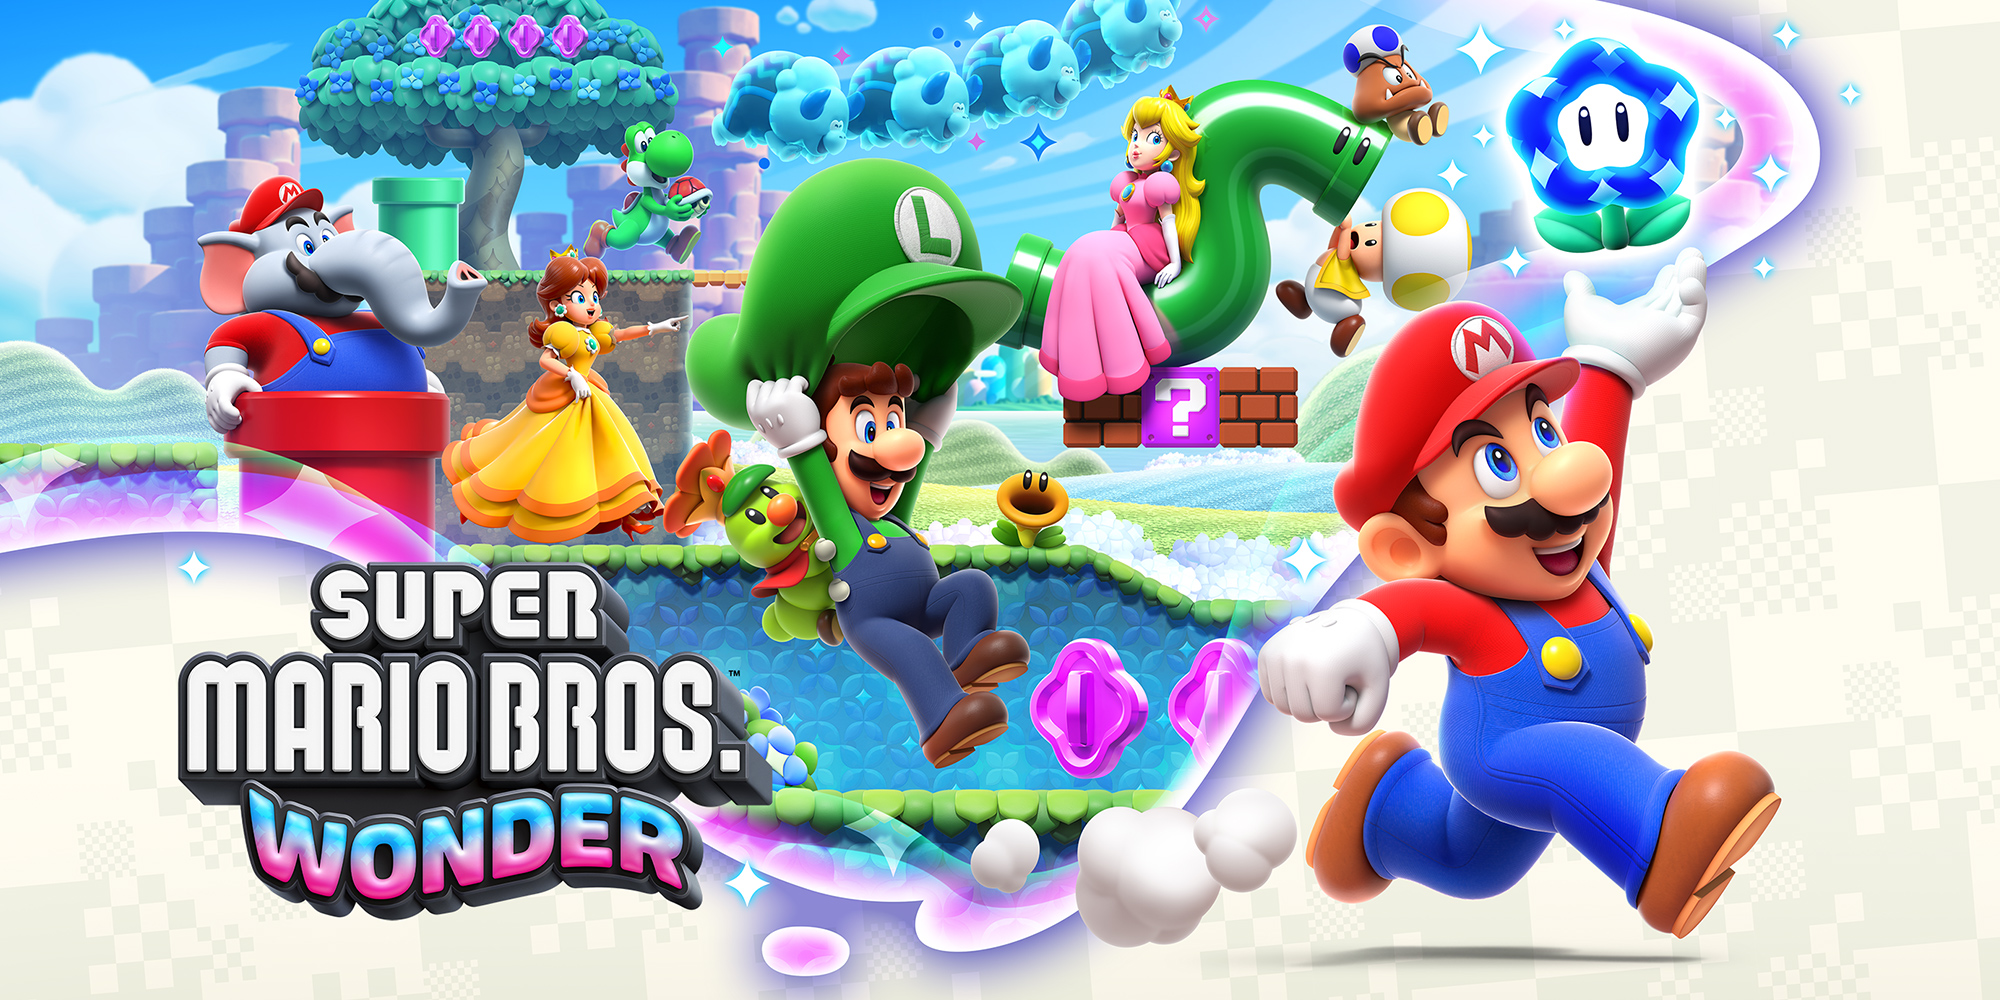 Super Mario Bros. Wonder will take up about 4.5 GB of space on your Switch